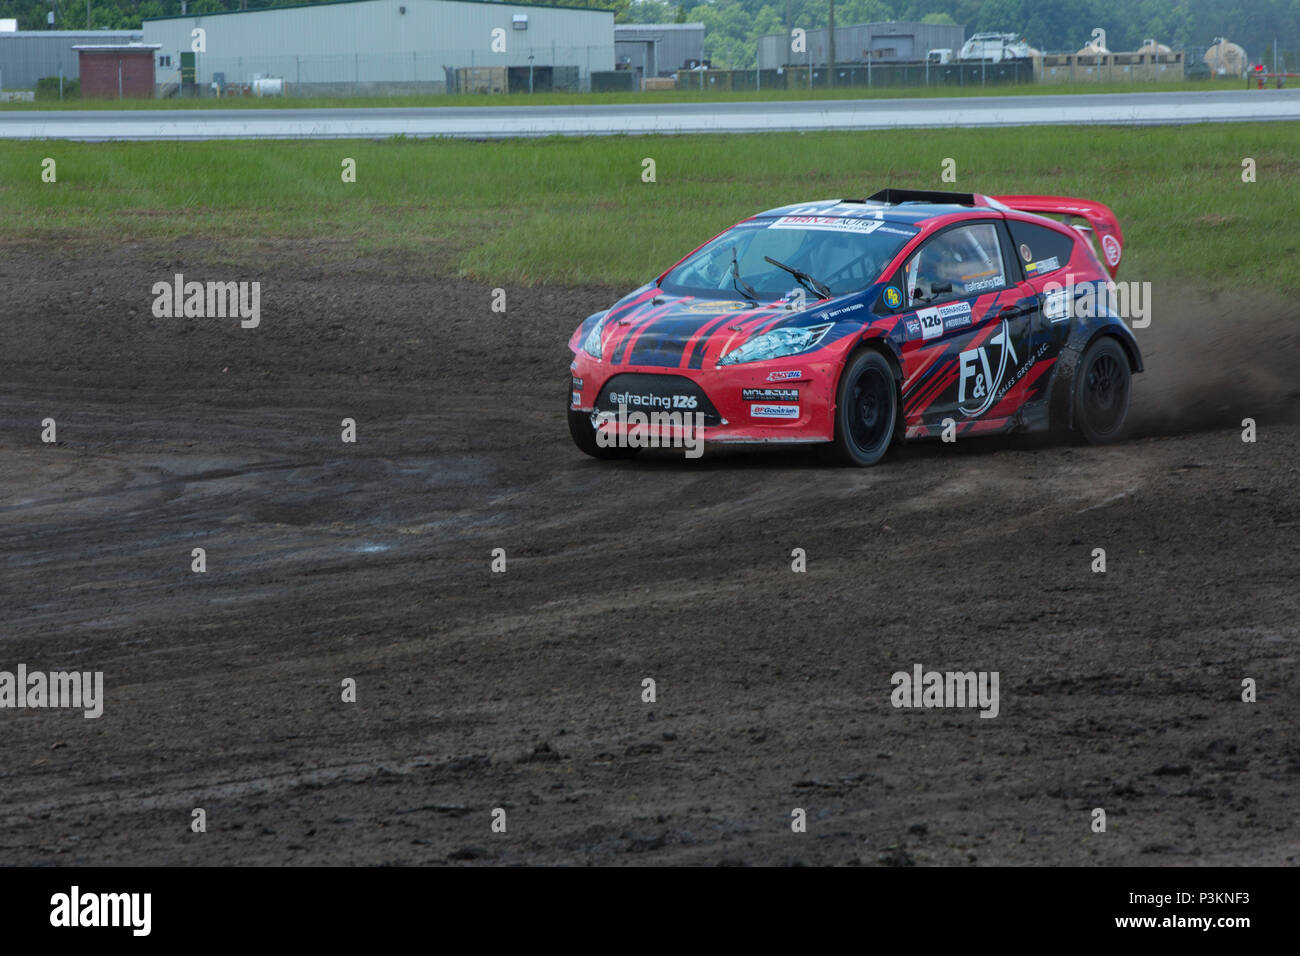 Alejandro Fernandez, a driver with AF racing team, accelerates around a corner, Marine Corps Air Station New River, N.C., July 2, 2016. The world's best rallycross drivers are competing at MCAS New River for the second season in a row for a doubleheader July 2-3, 2016, featuring an all-new course layout, bringing the track even closer to the fans. (U.S. Marine Corps photo by Lance Cpl. Austin M. Livingston MCIEAST Combat Camera/Released) Stock Photo